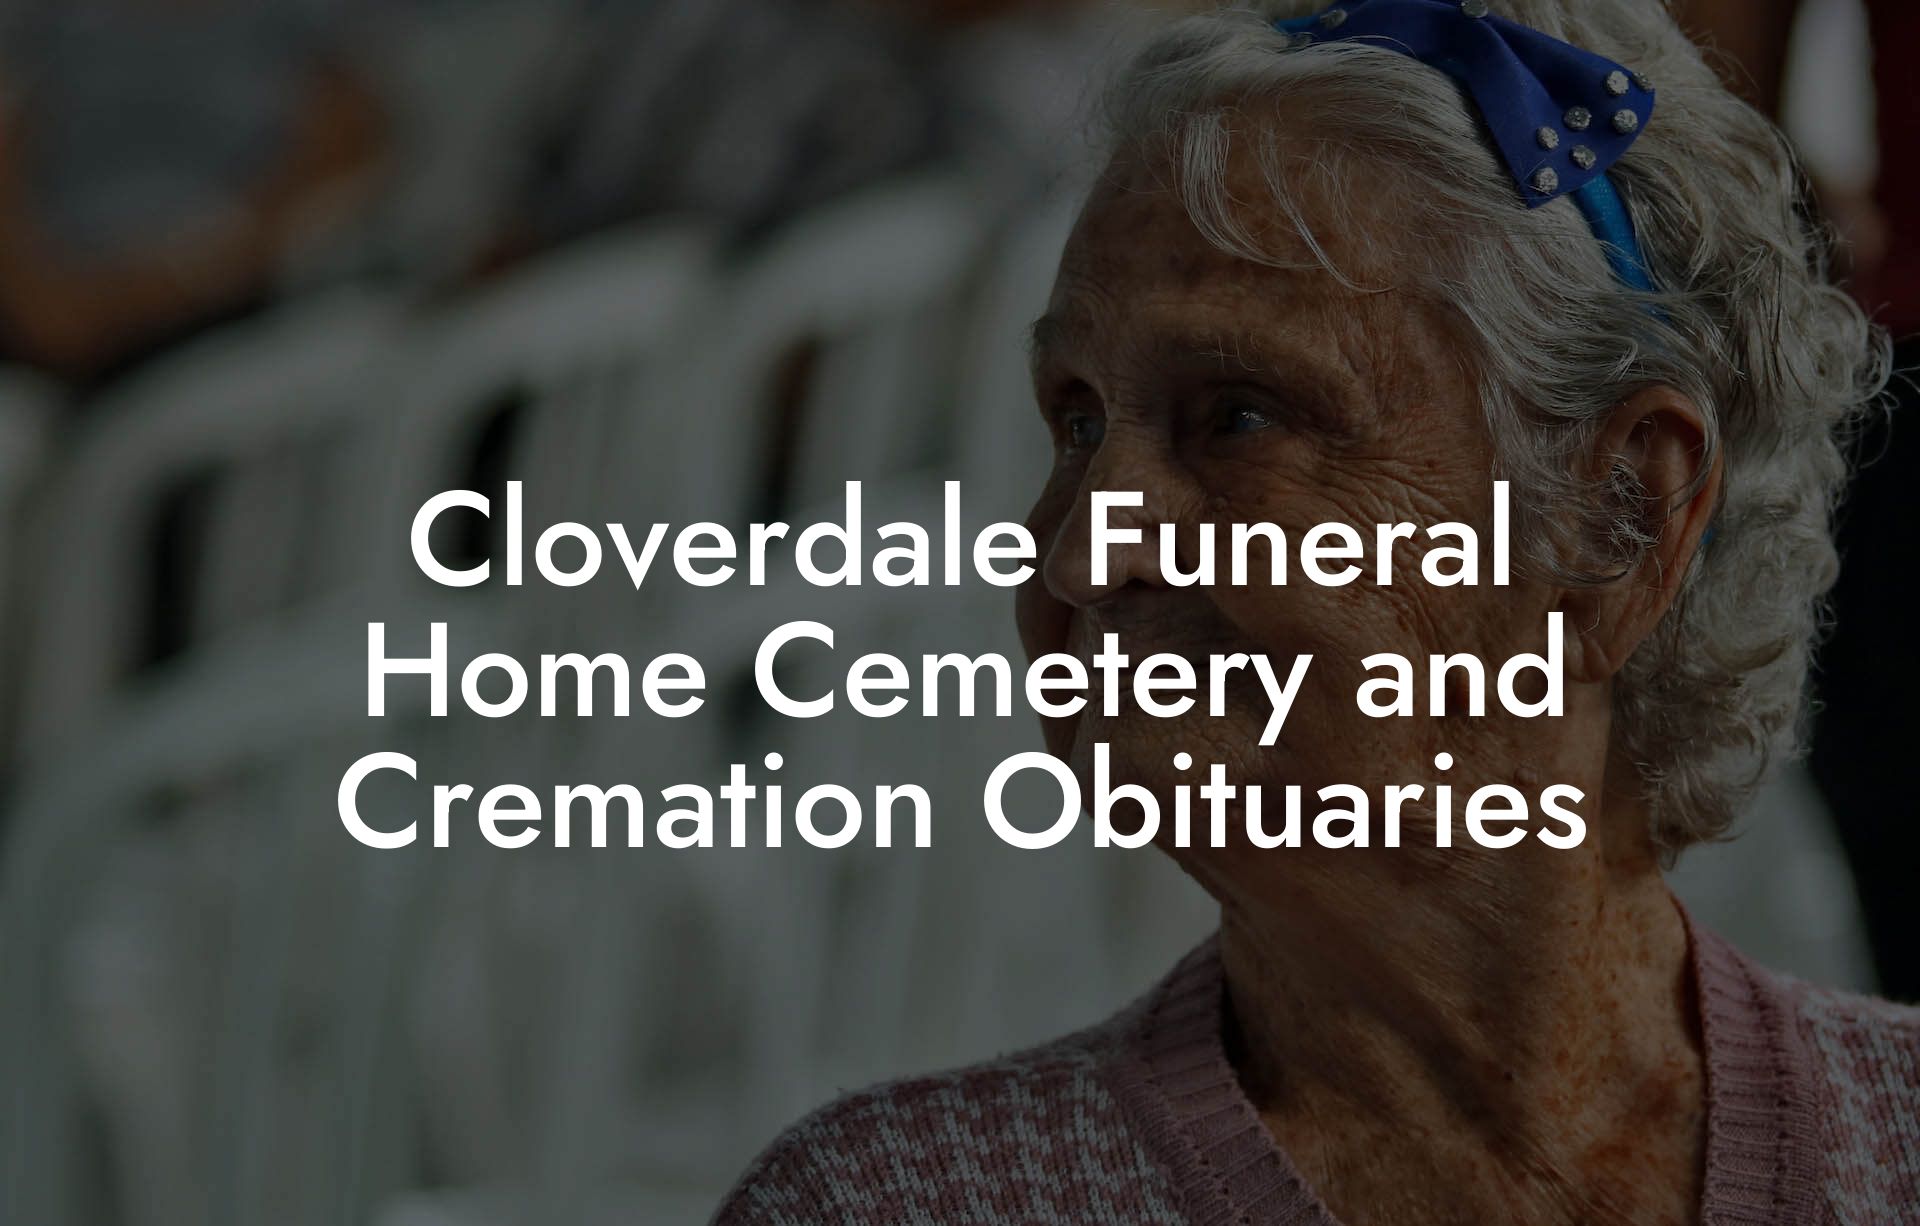 Cloverdale Funeral Home Cemetery and Cremation Obituaries